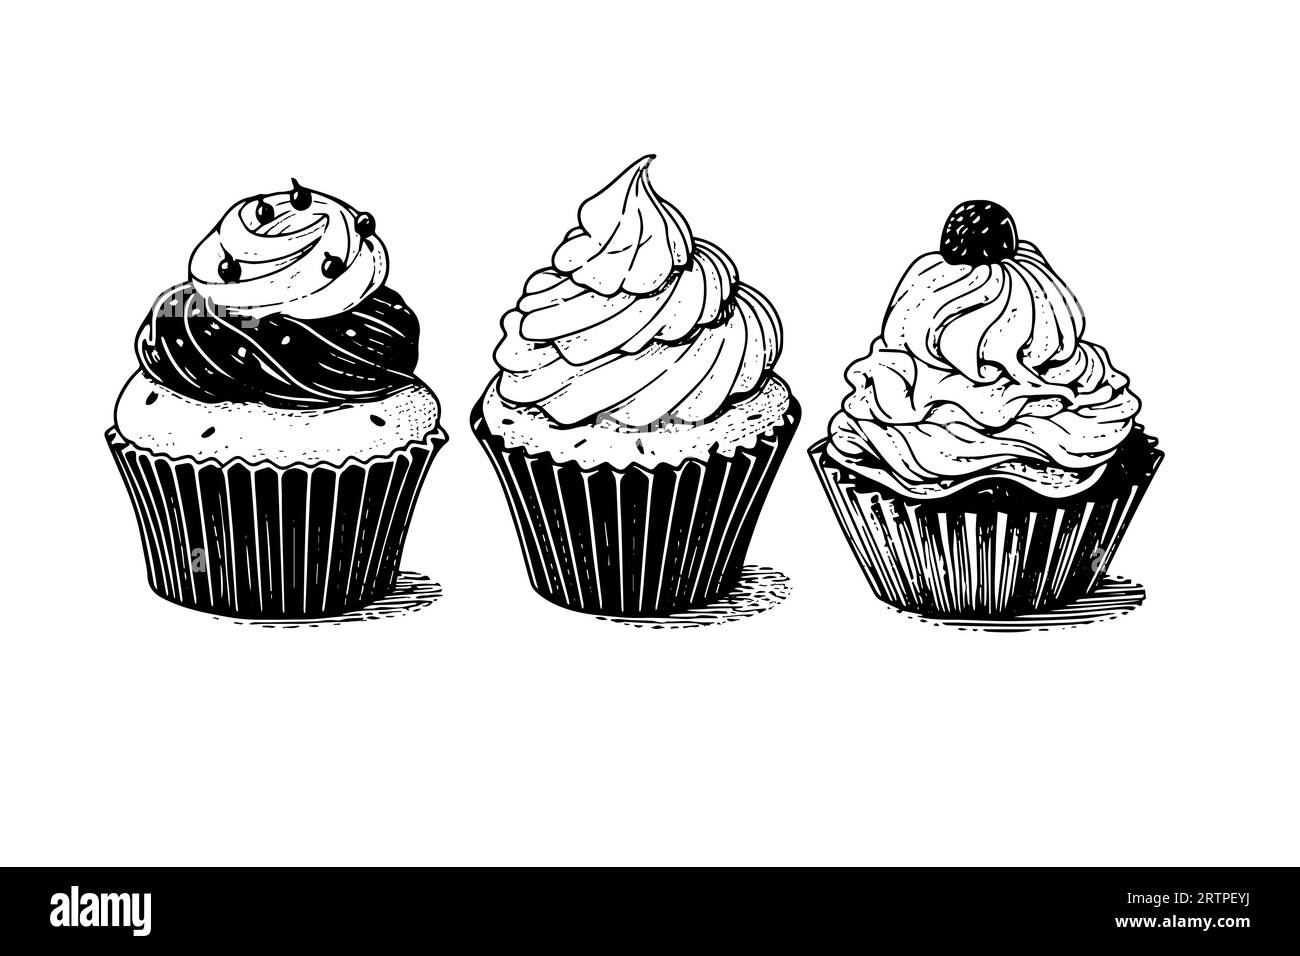 How to Draw a Cupcake - HelloArtsy